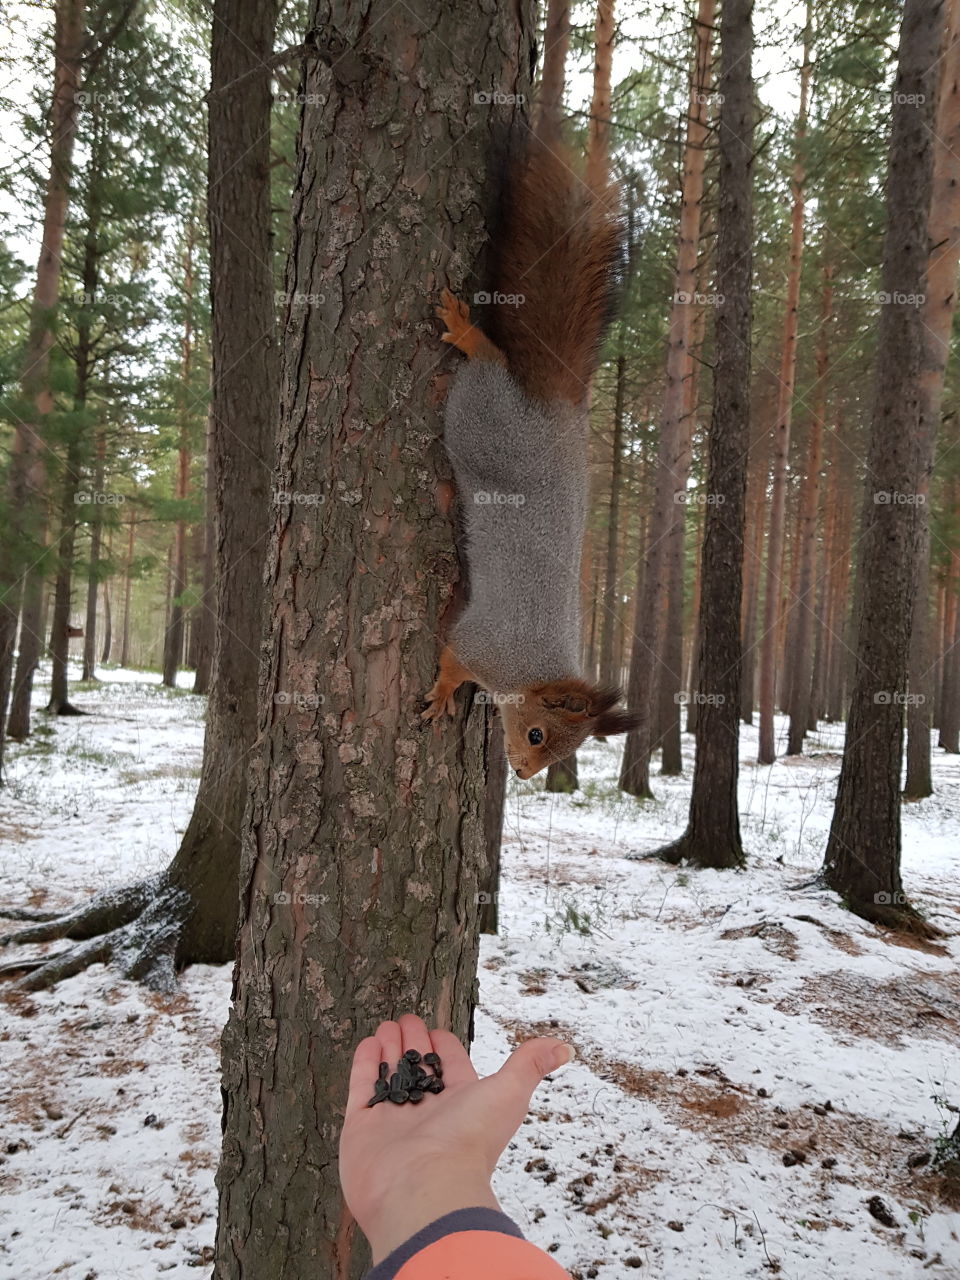 squirrel on a tree in winter